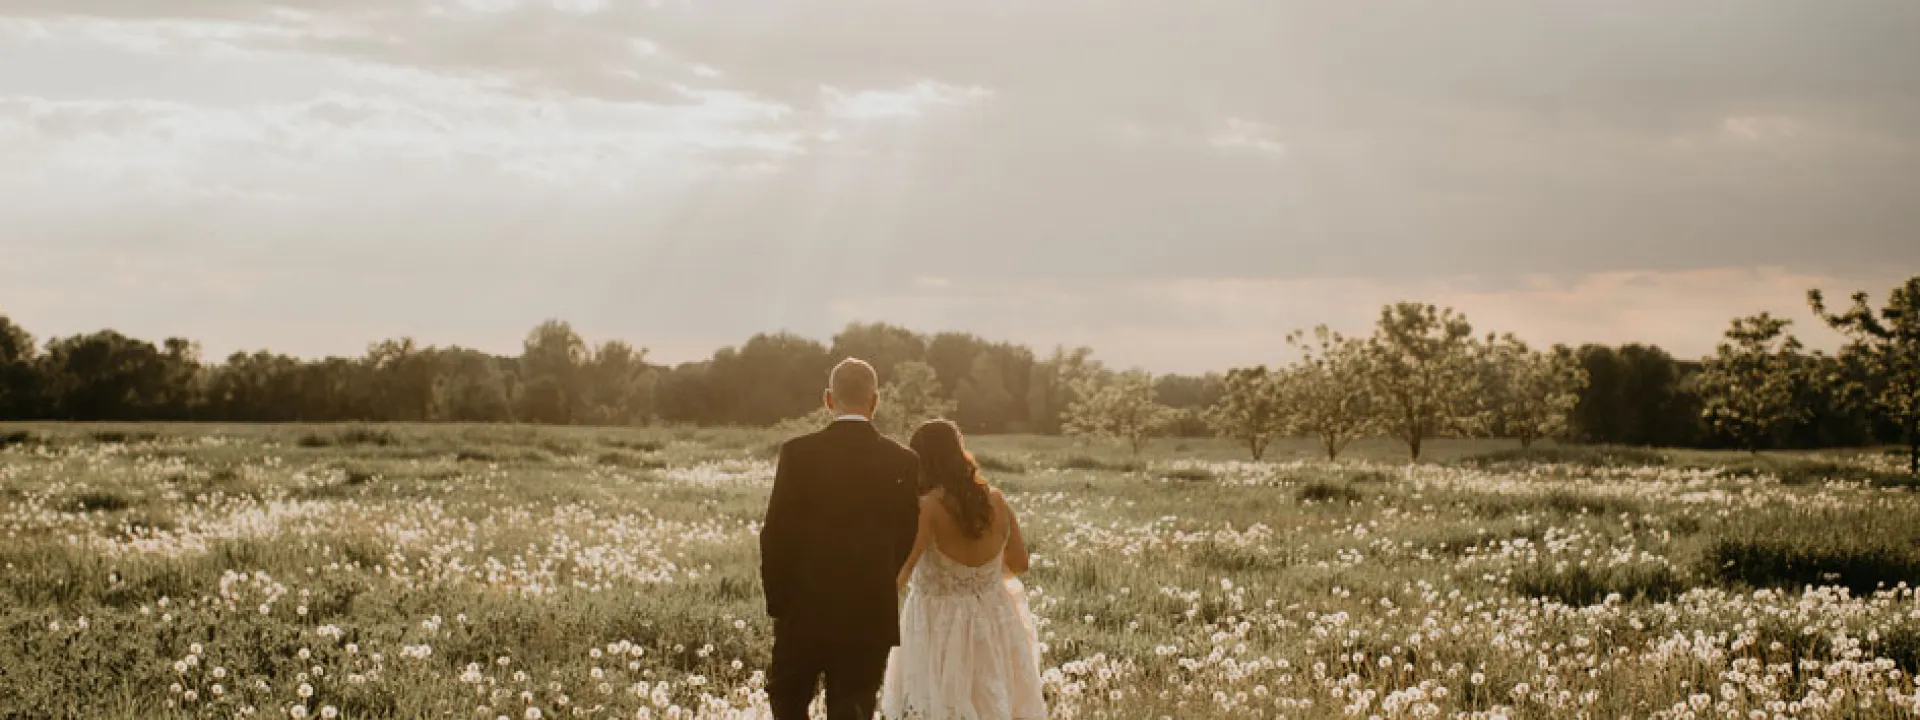 A remote field during golden hour made for stunning photos of the bride and groom.